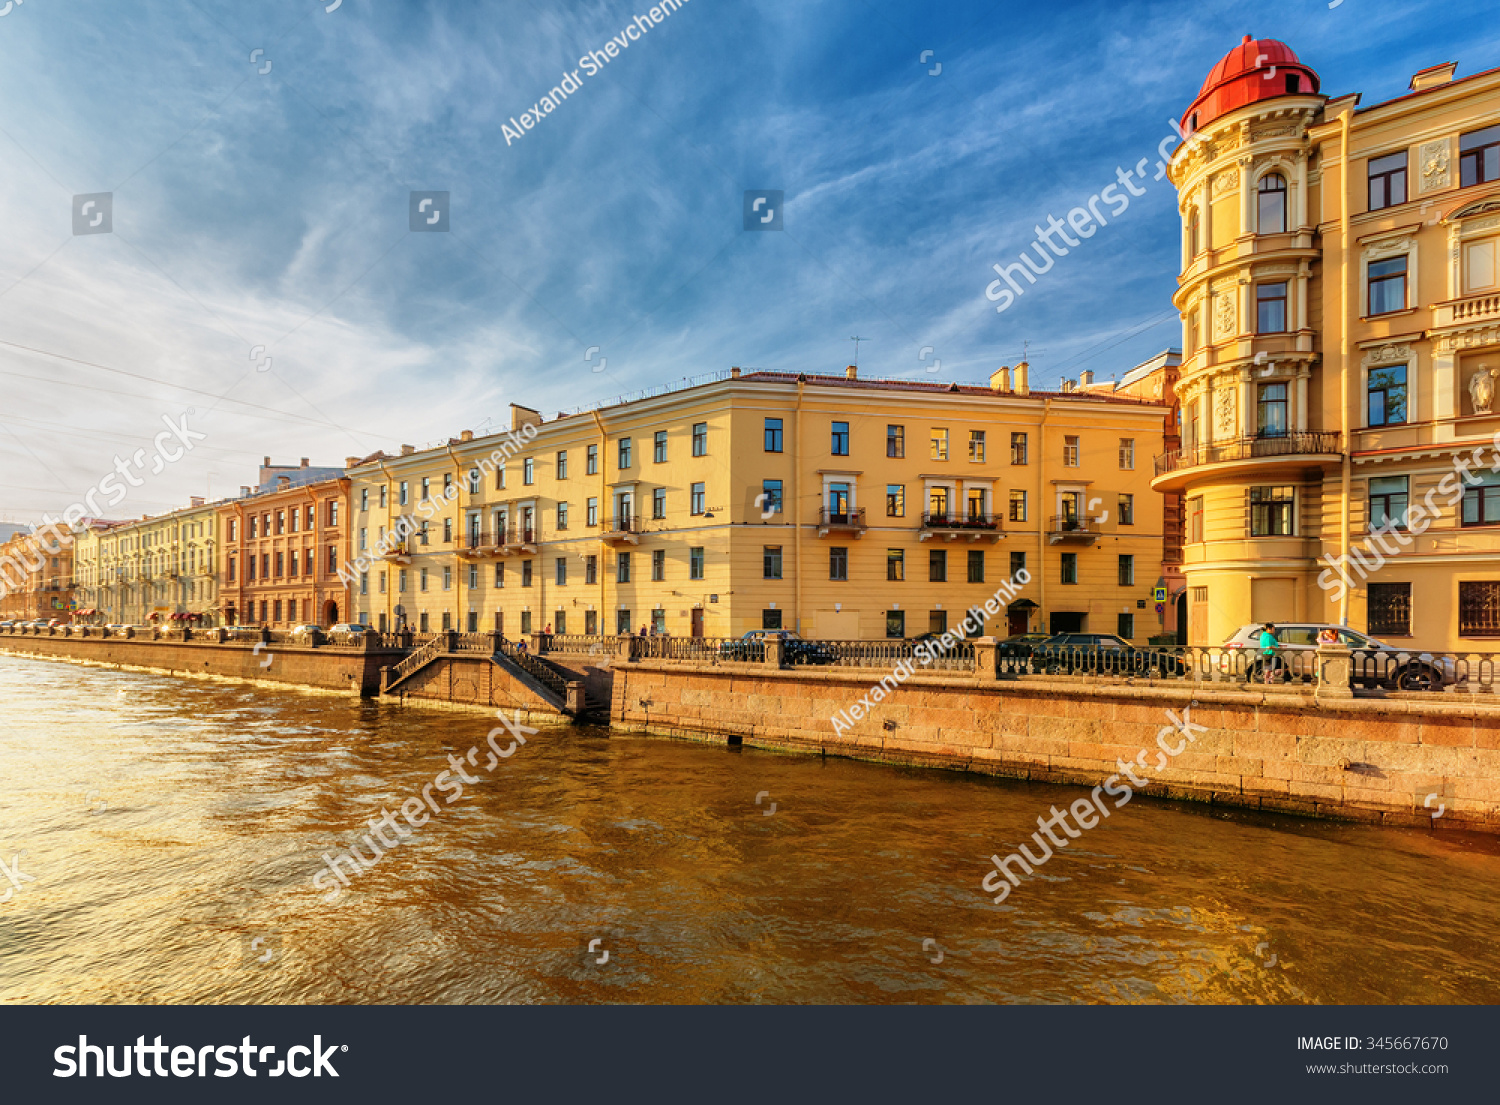 Saint Petersburg/Russia - August 13, 2015: The embankment of Griboyedov Canal #345667670